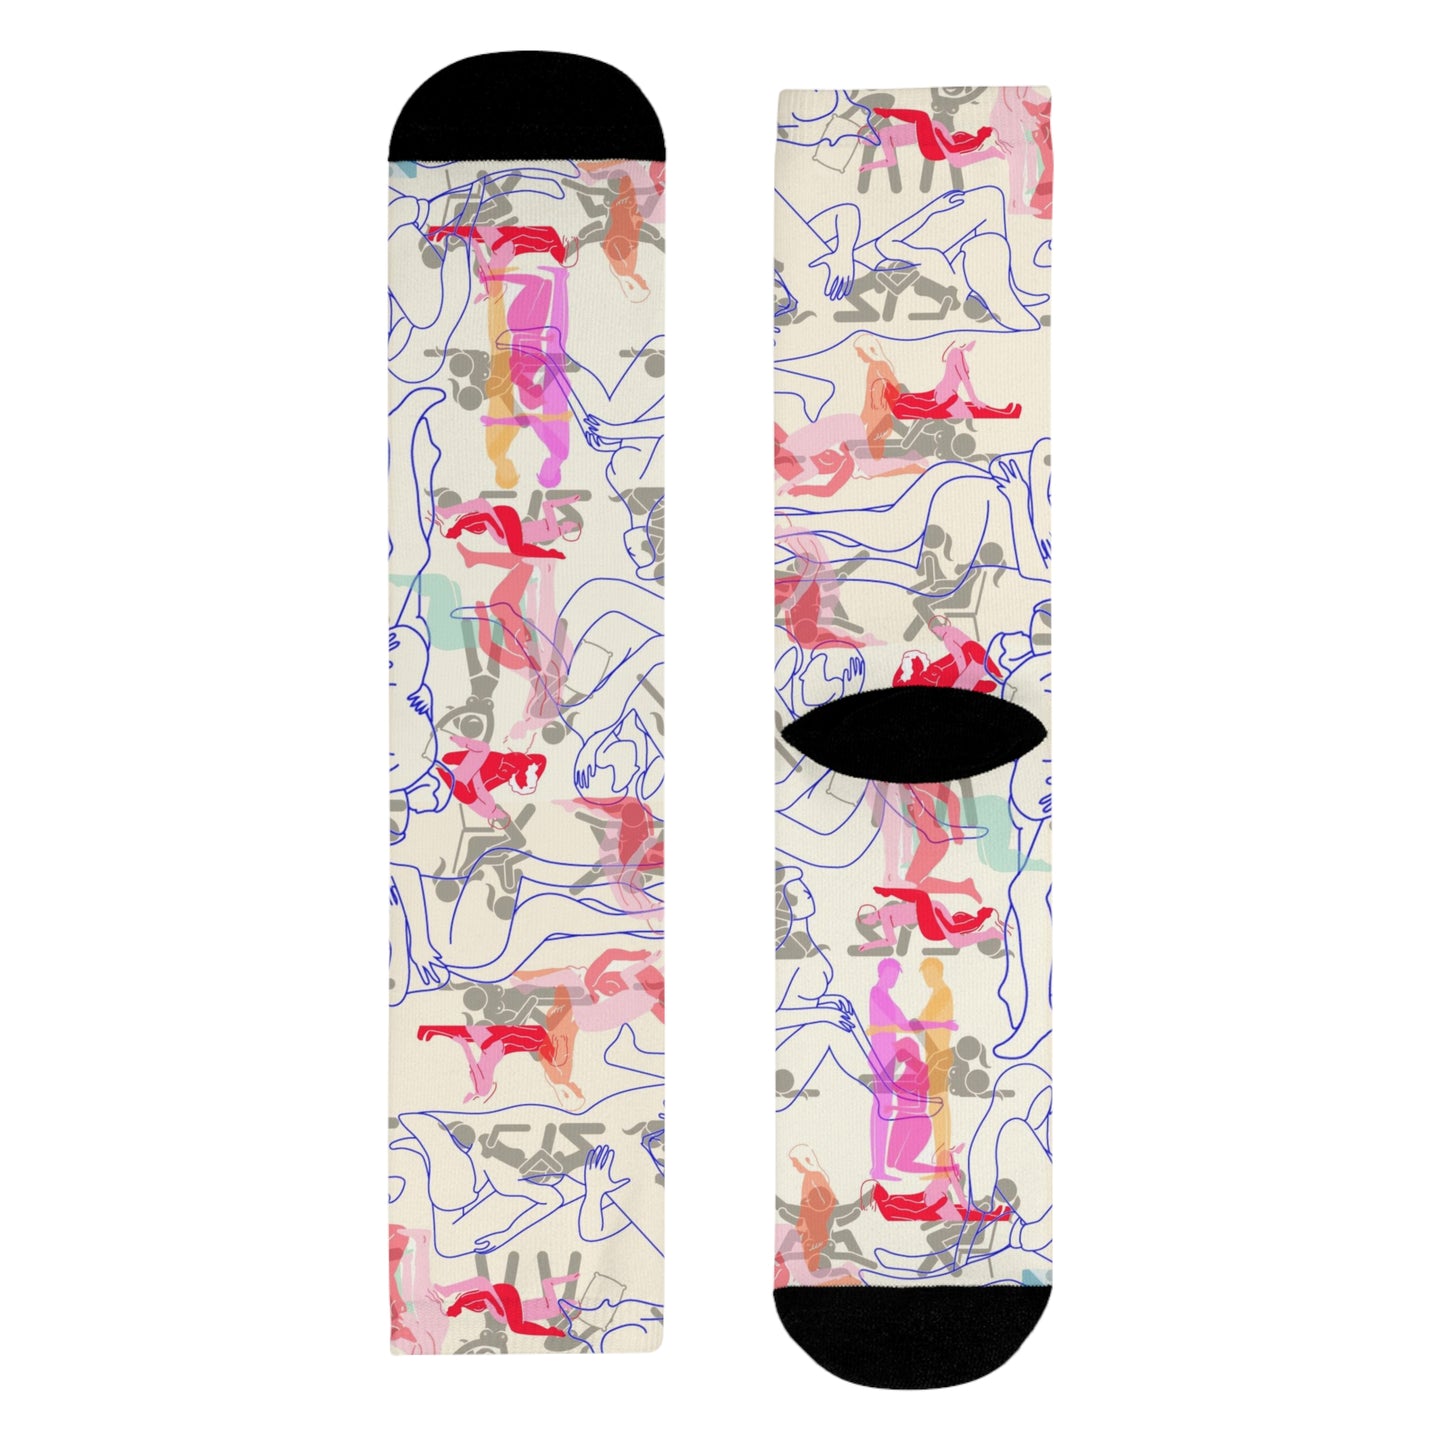 BISEXUAL ORGY Sublimation Crew Socks